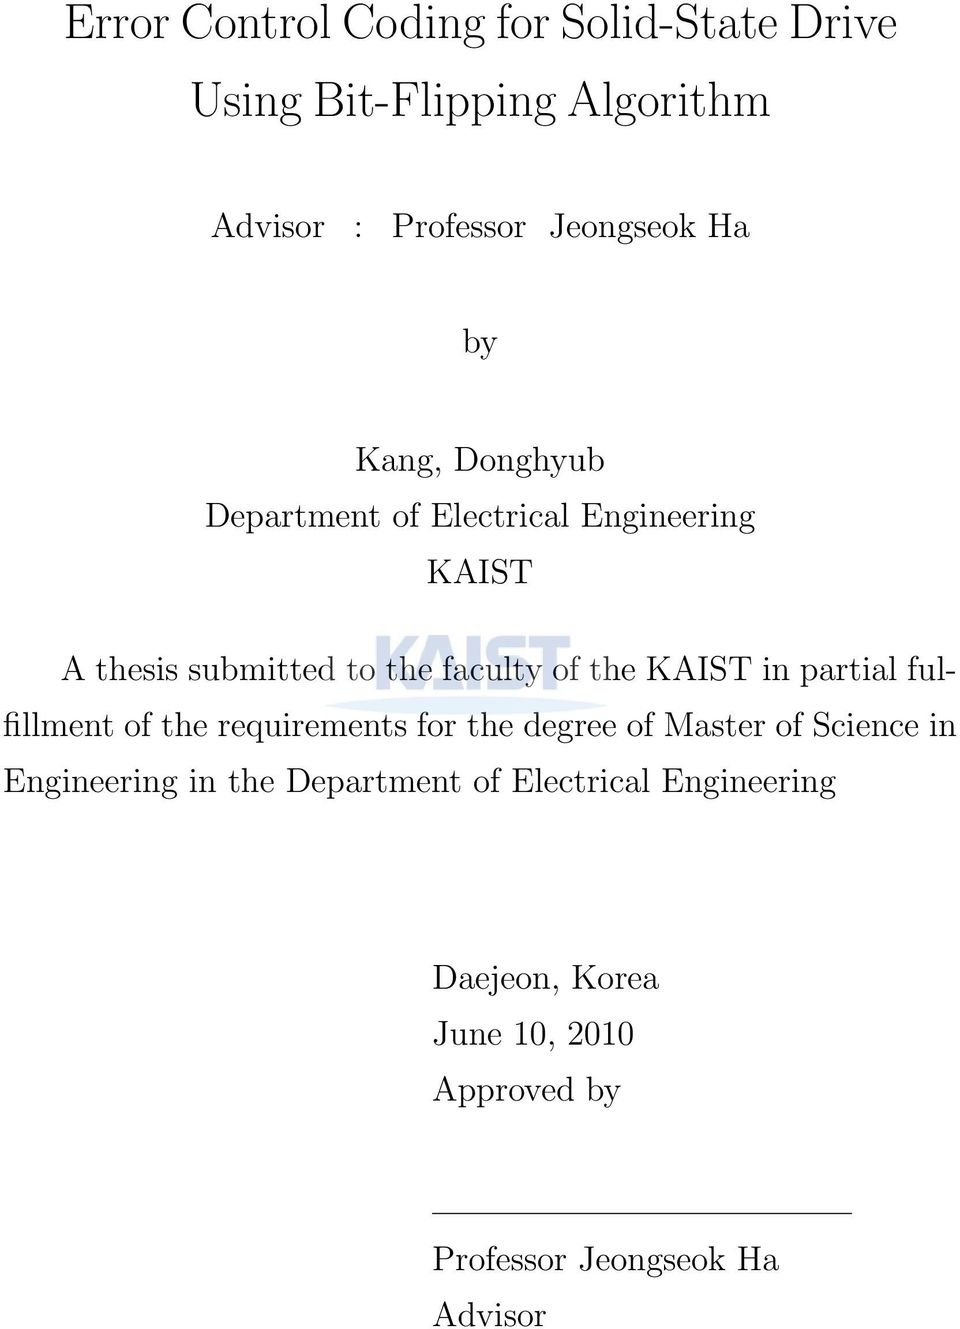 KAIST in partial fulfillment of the requirements for the degree of Master of Science in Engineering in